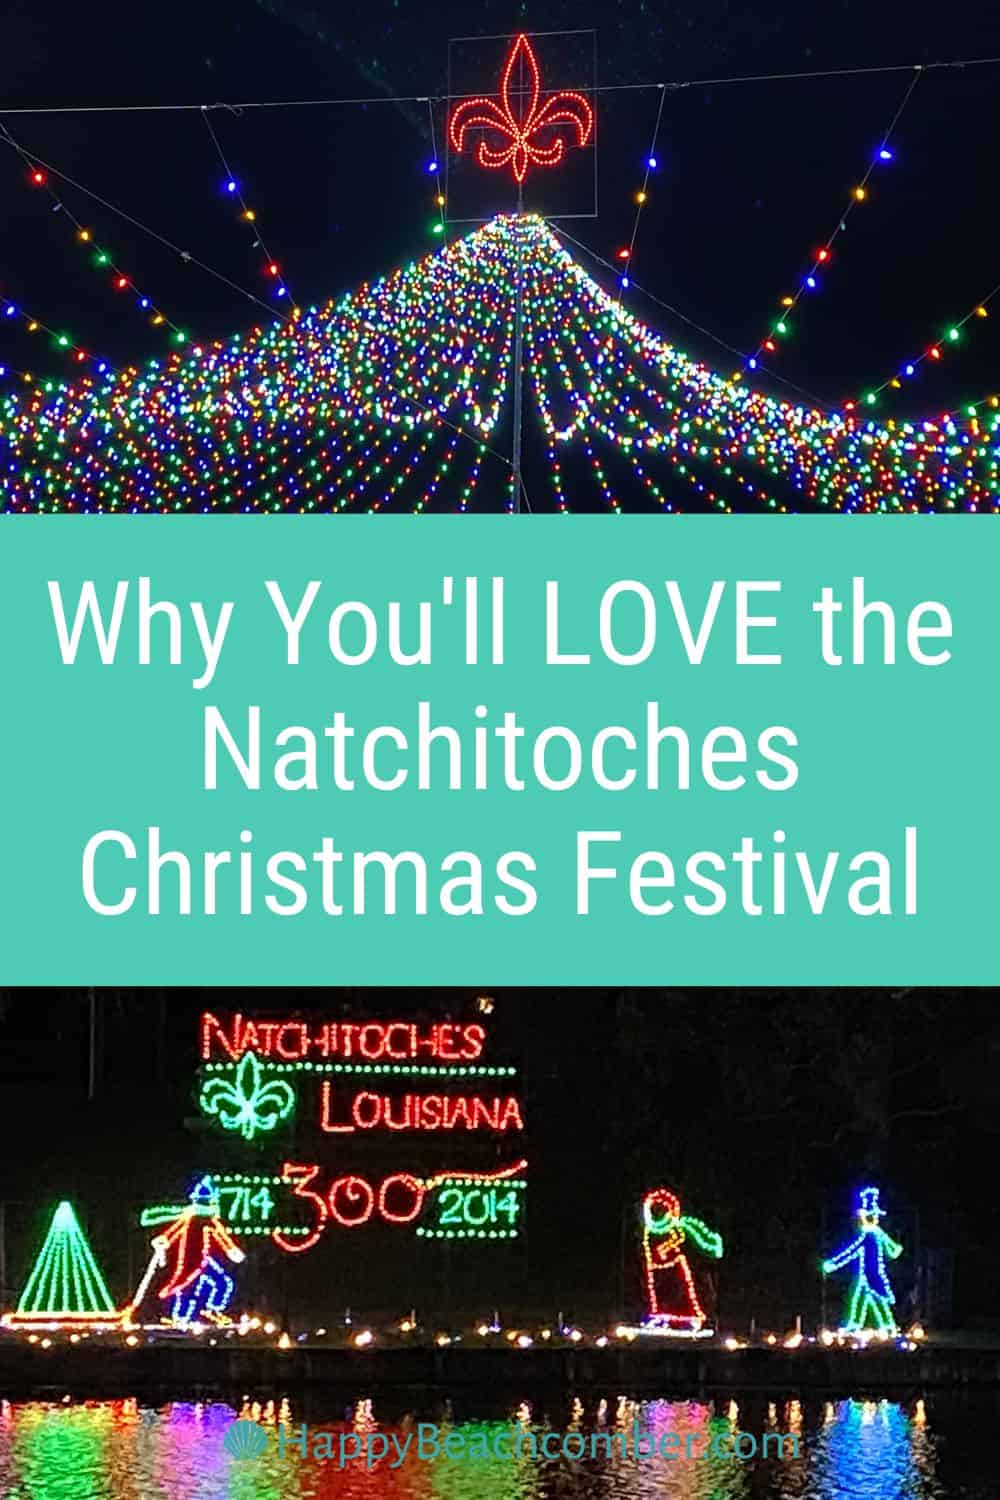 Why You'll Love the Natchitoches Christmas Festival